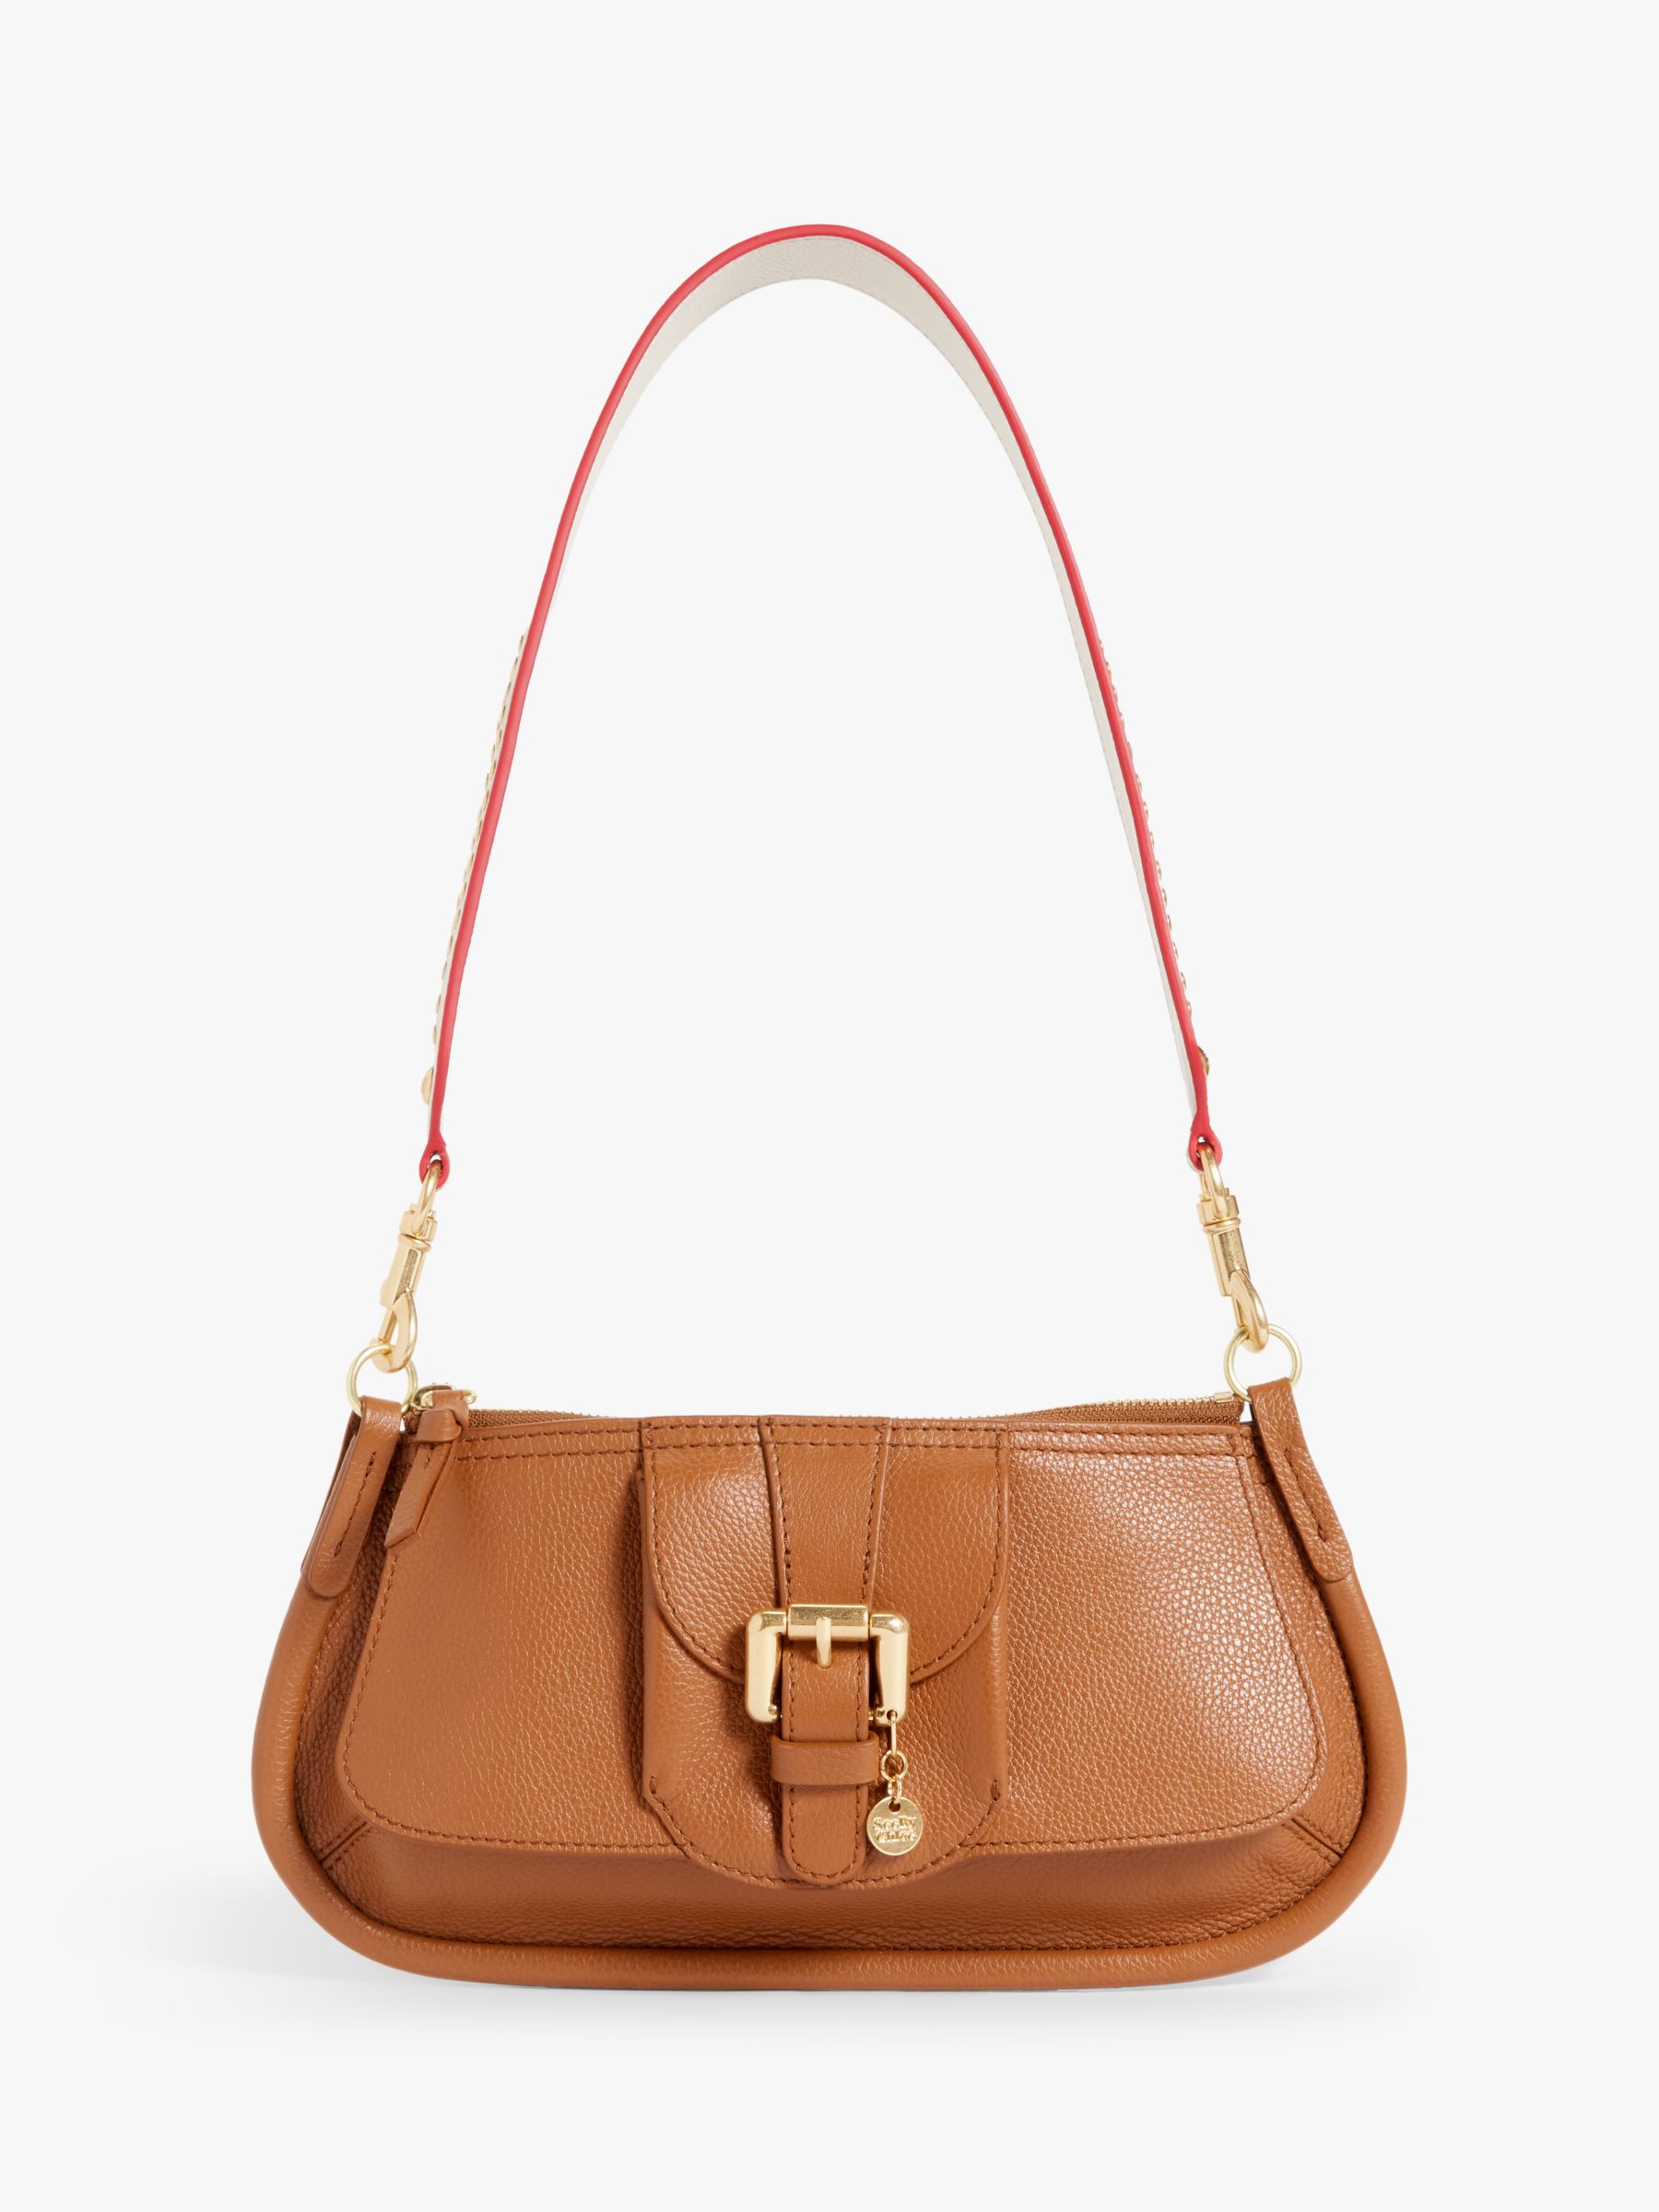 See By Chloé Lesly Leather Shoulder Bag, Caramello at John Lewis & Partners